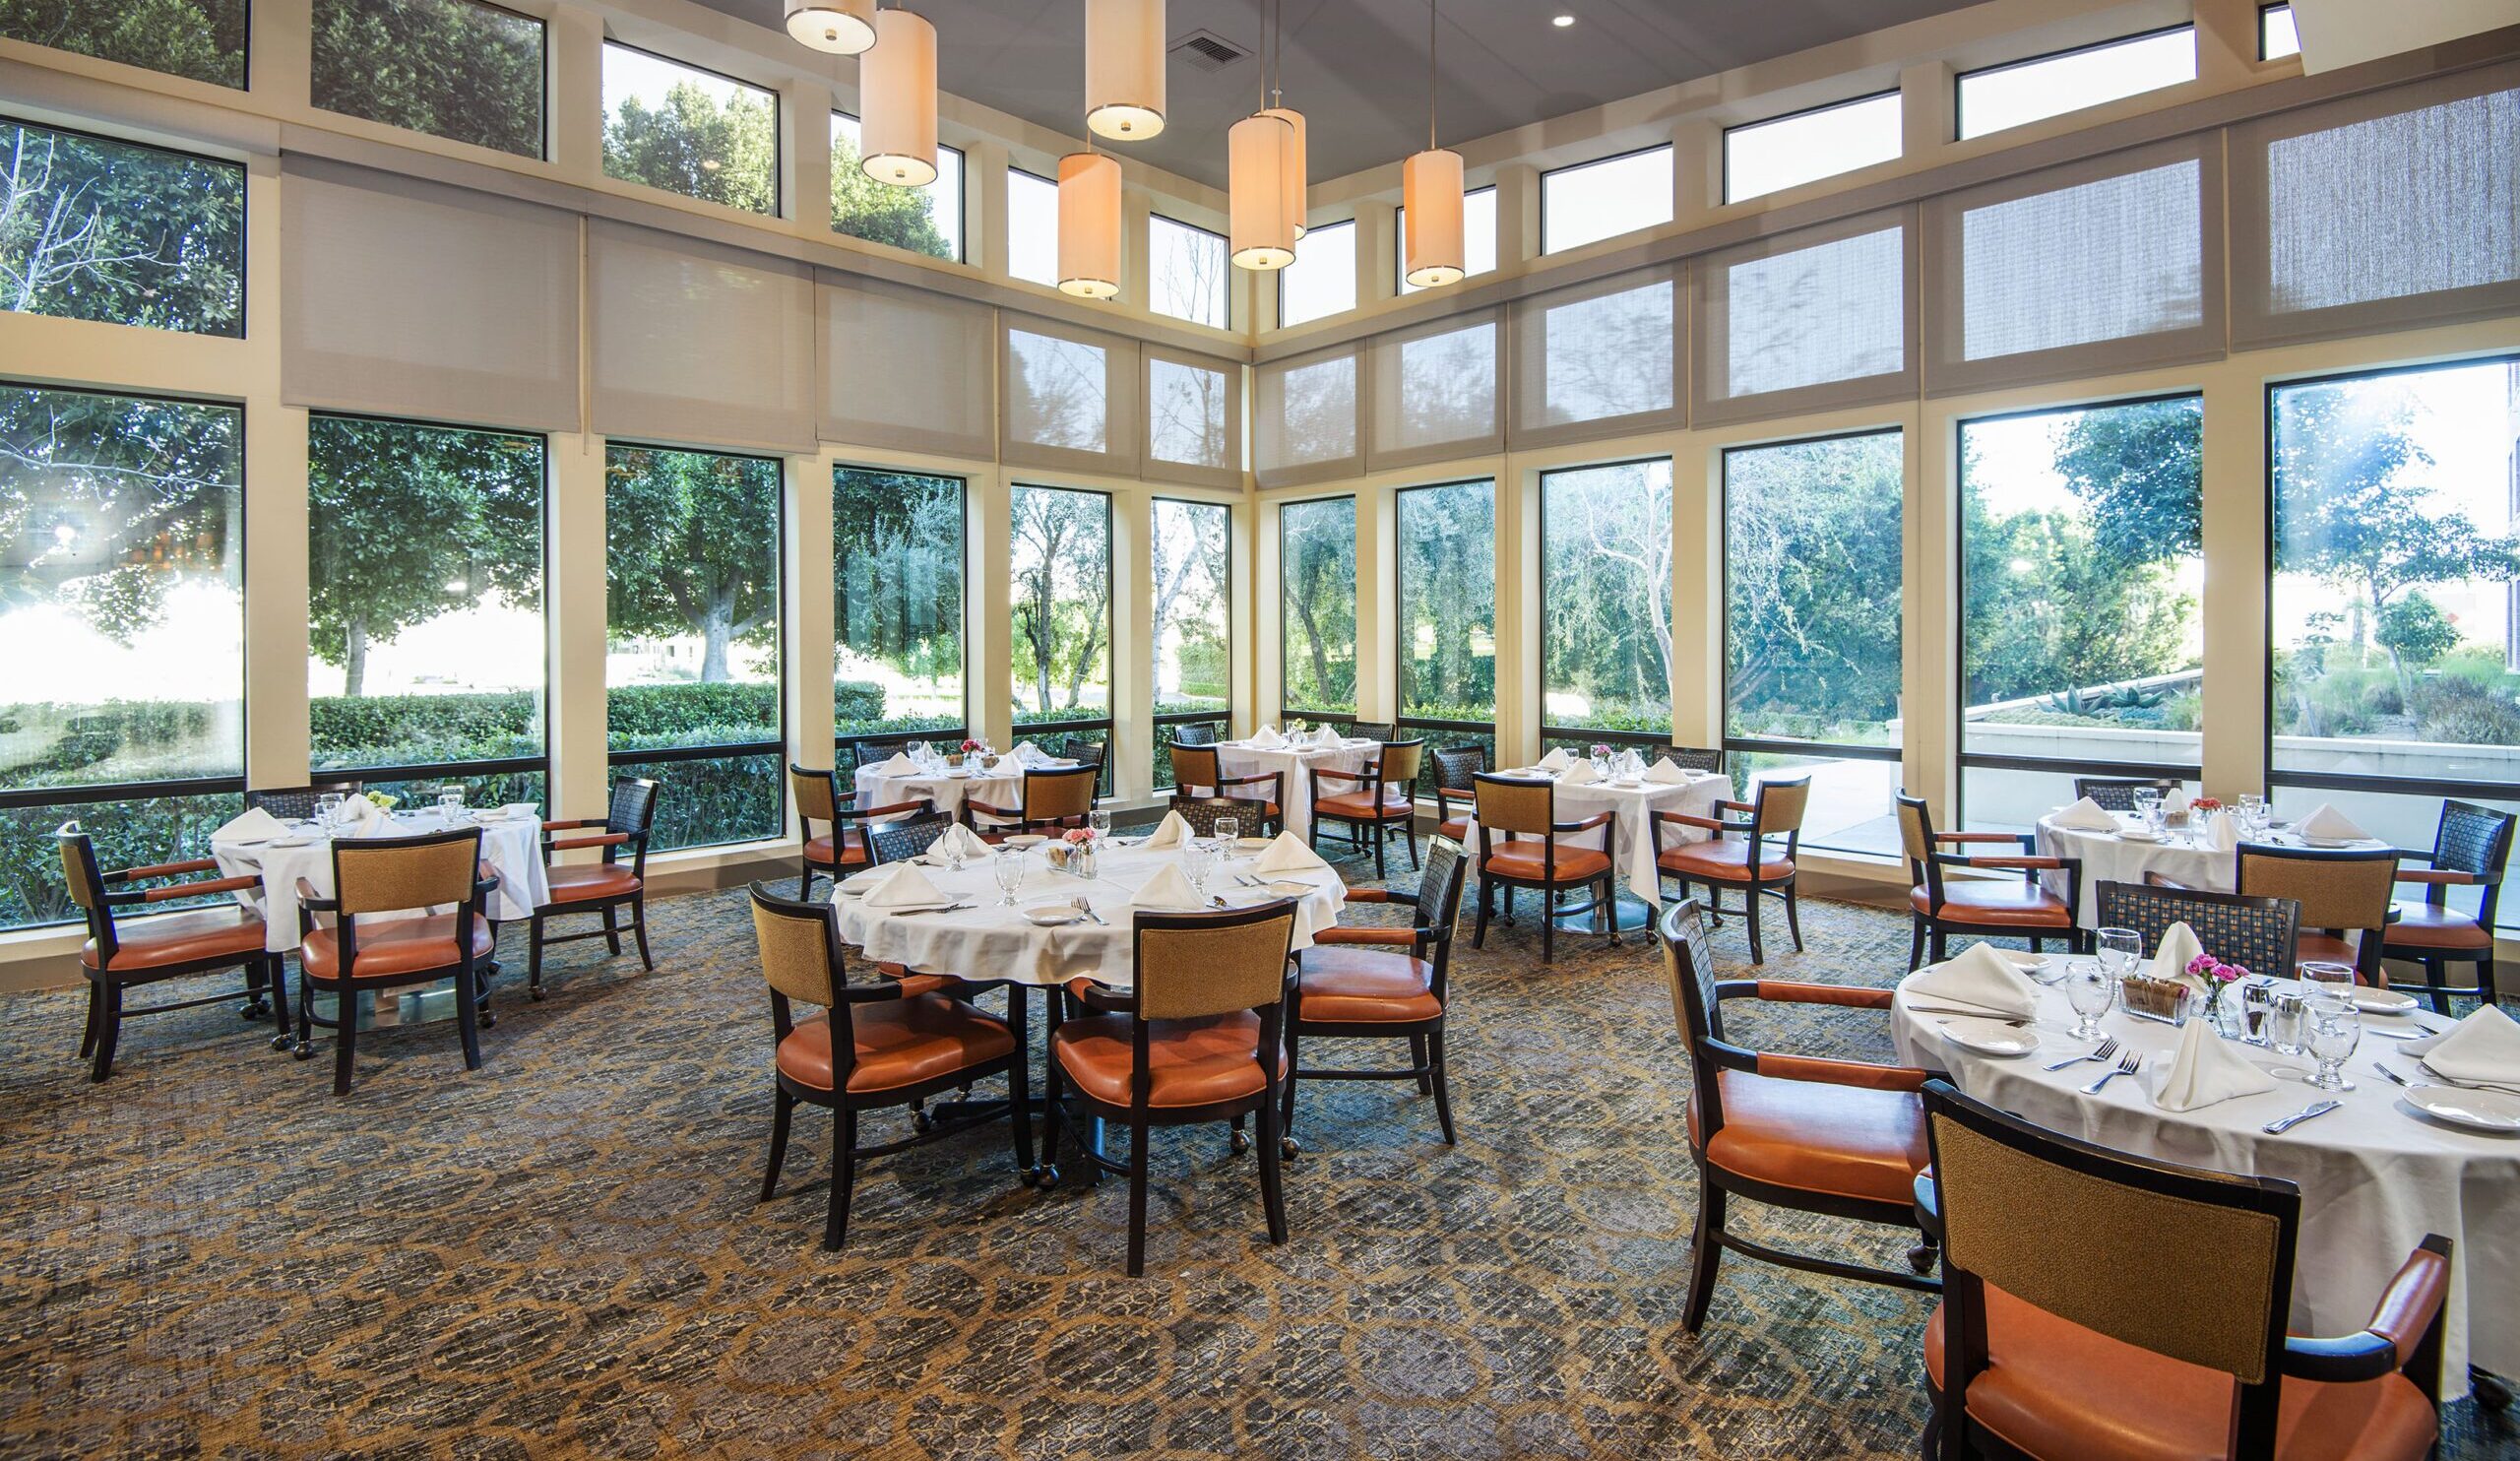 the upscale dining room at the village northridge with loft ceilings and floor to ceiling windows